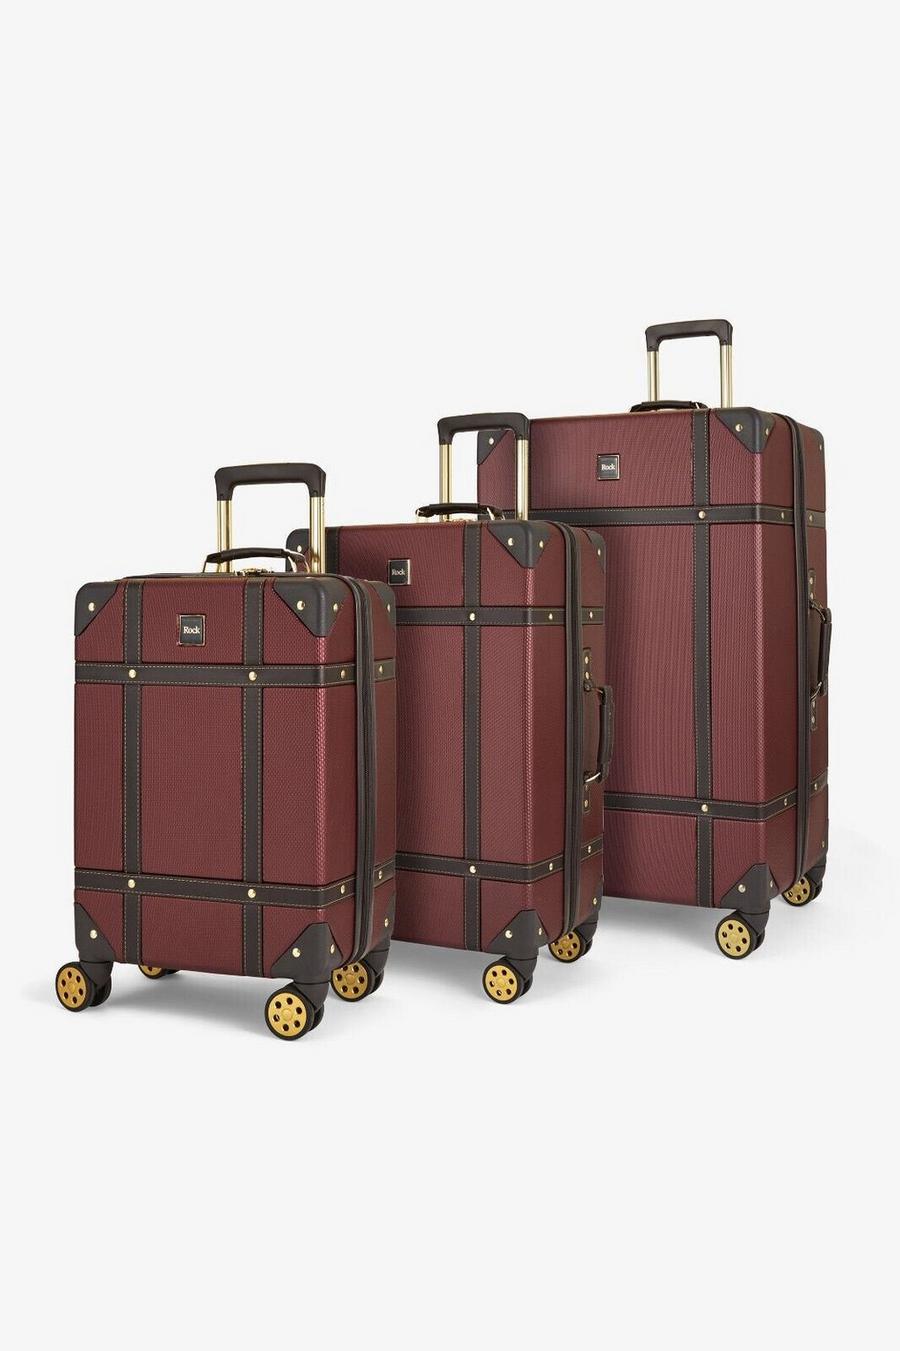 Burgundy Vintage Hard Shell Luggage Suitcase Trunk Cabin Travel Bags